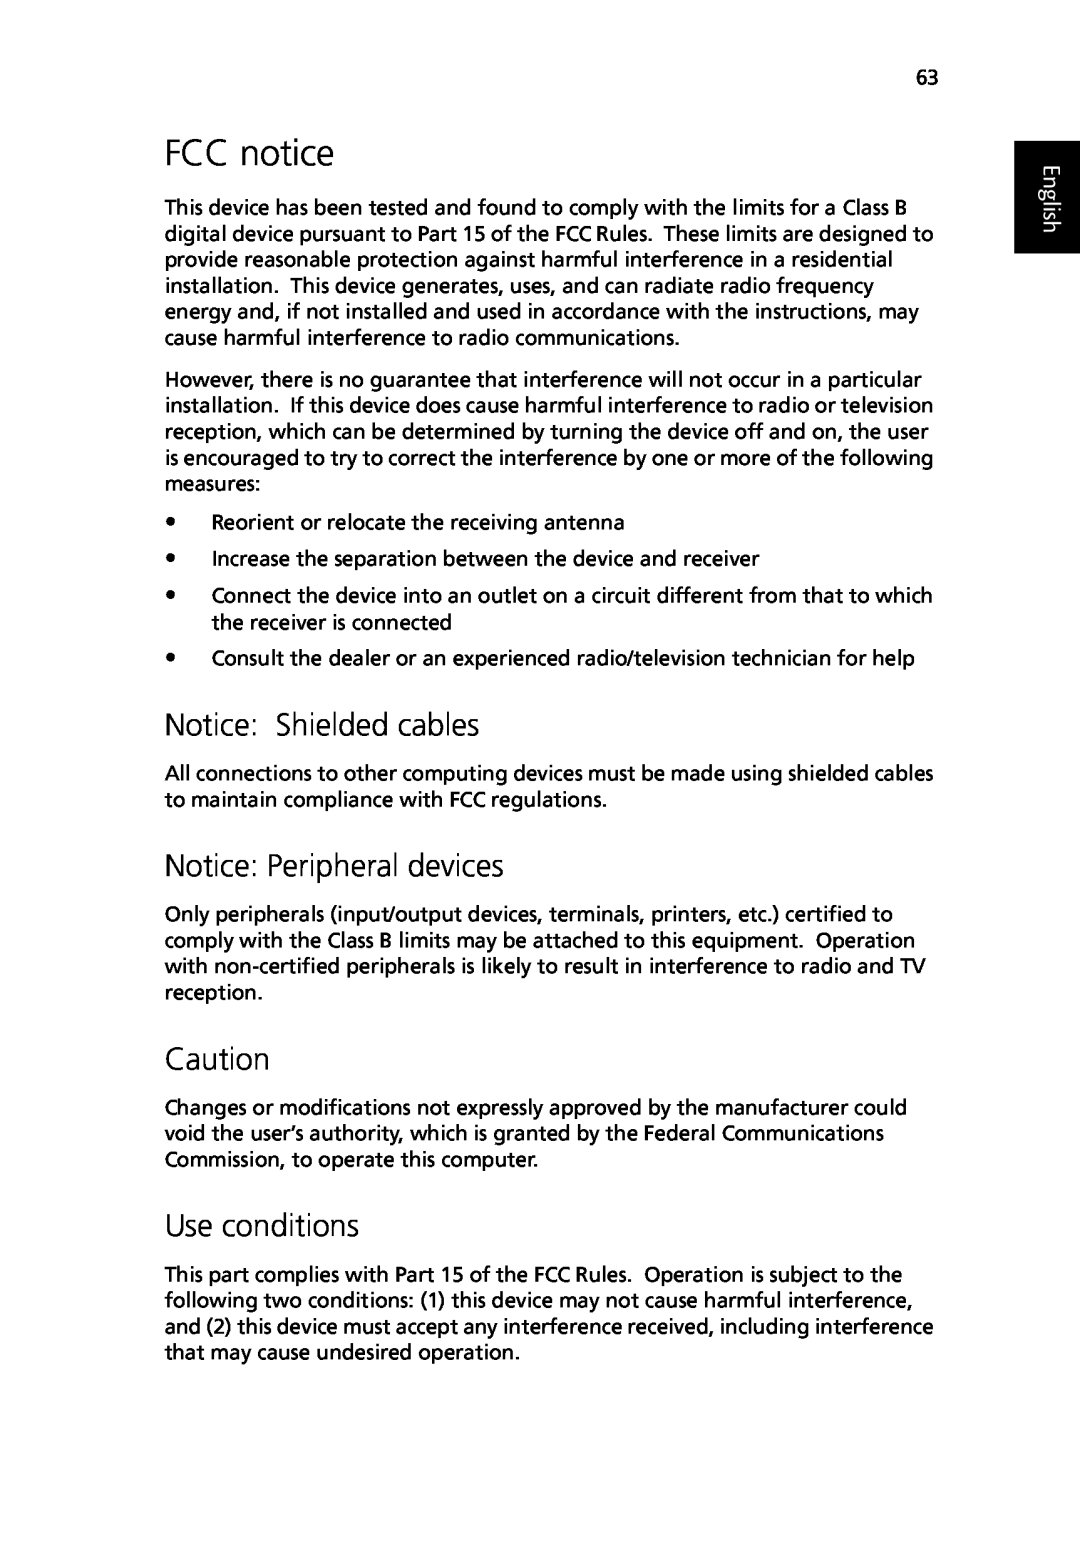 Acer TravelMate 530 manual FCC notice, Notice Shielded cables, Notice Peripheral devices, Use conditions, English 